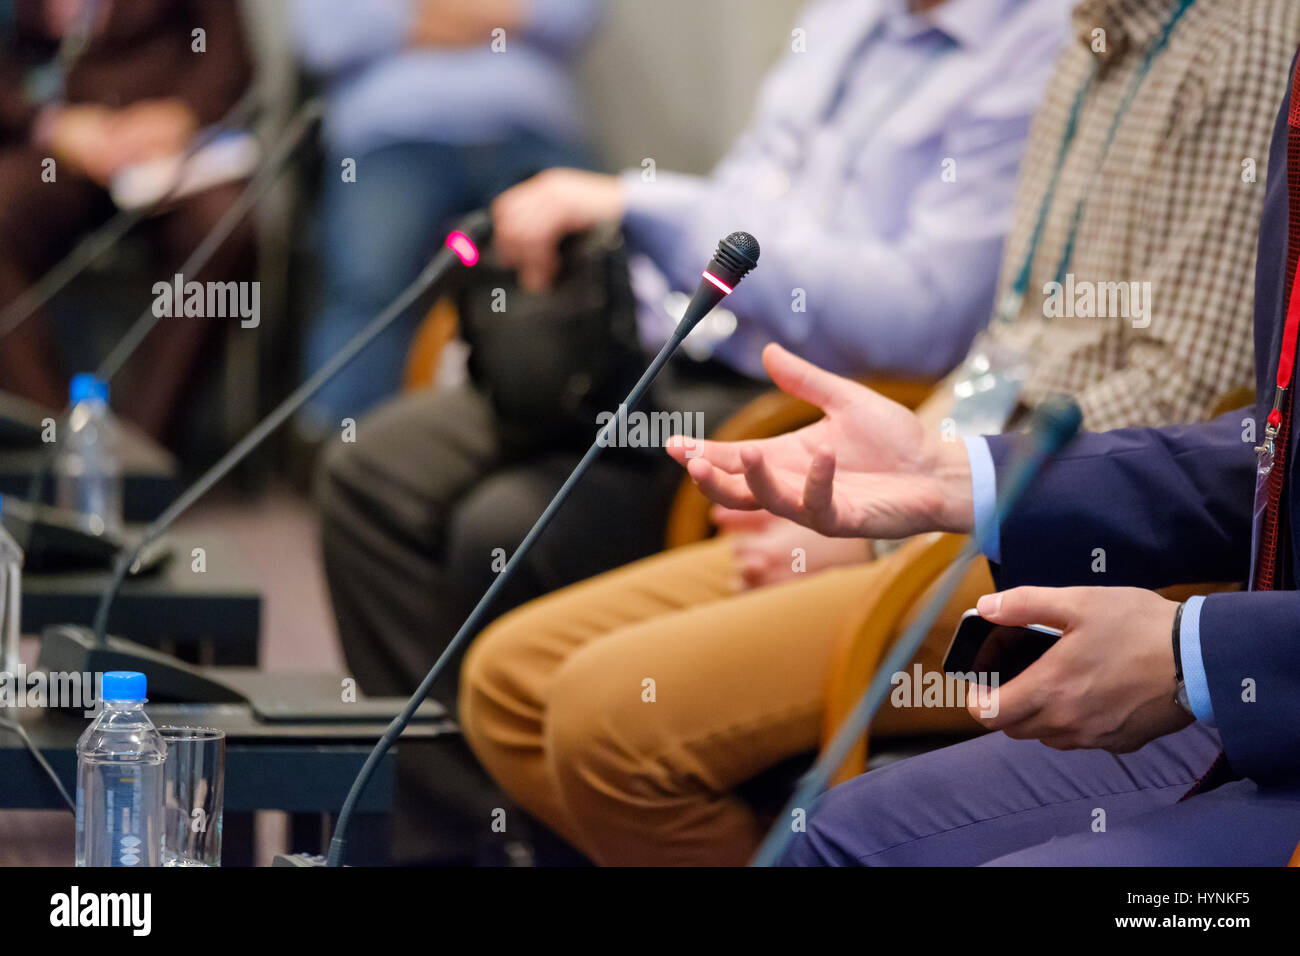 Speaker at a business conference Stock Photo